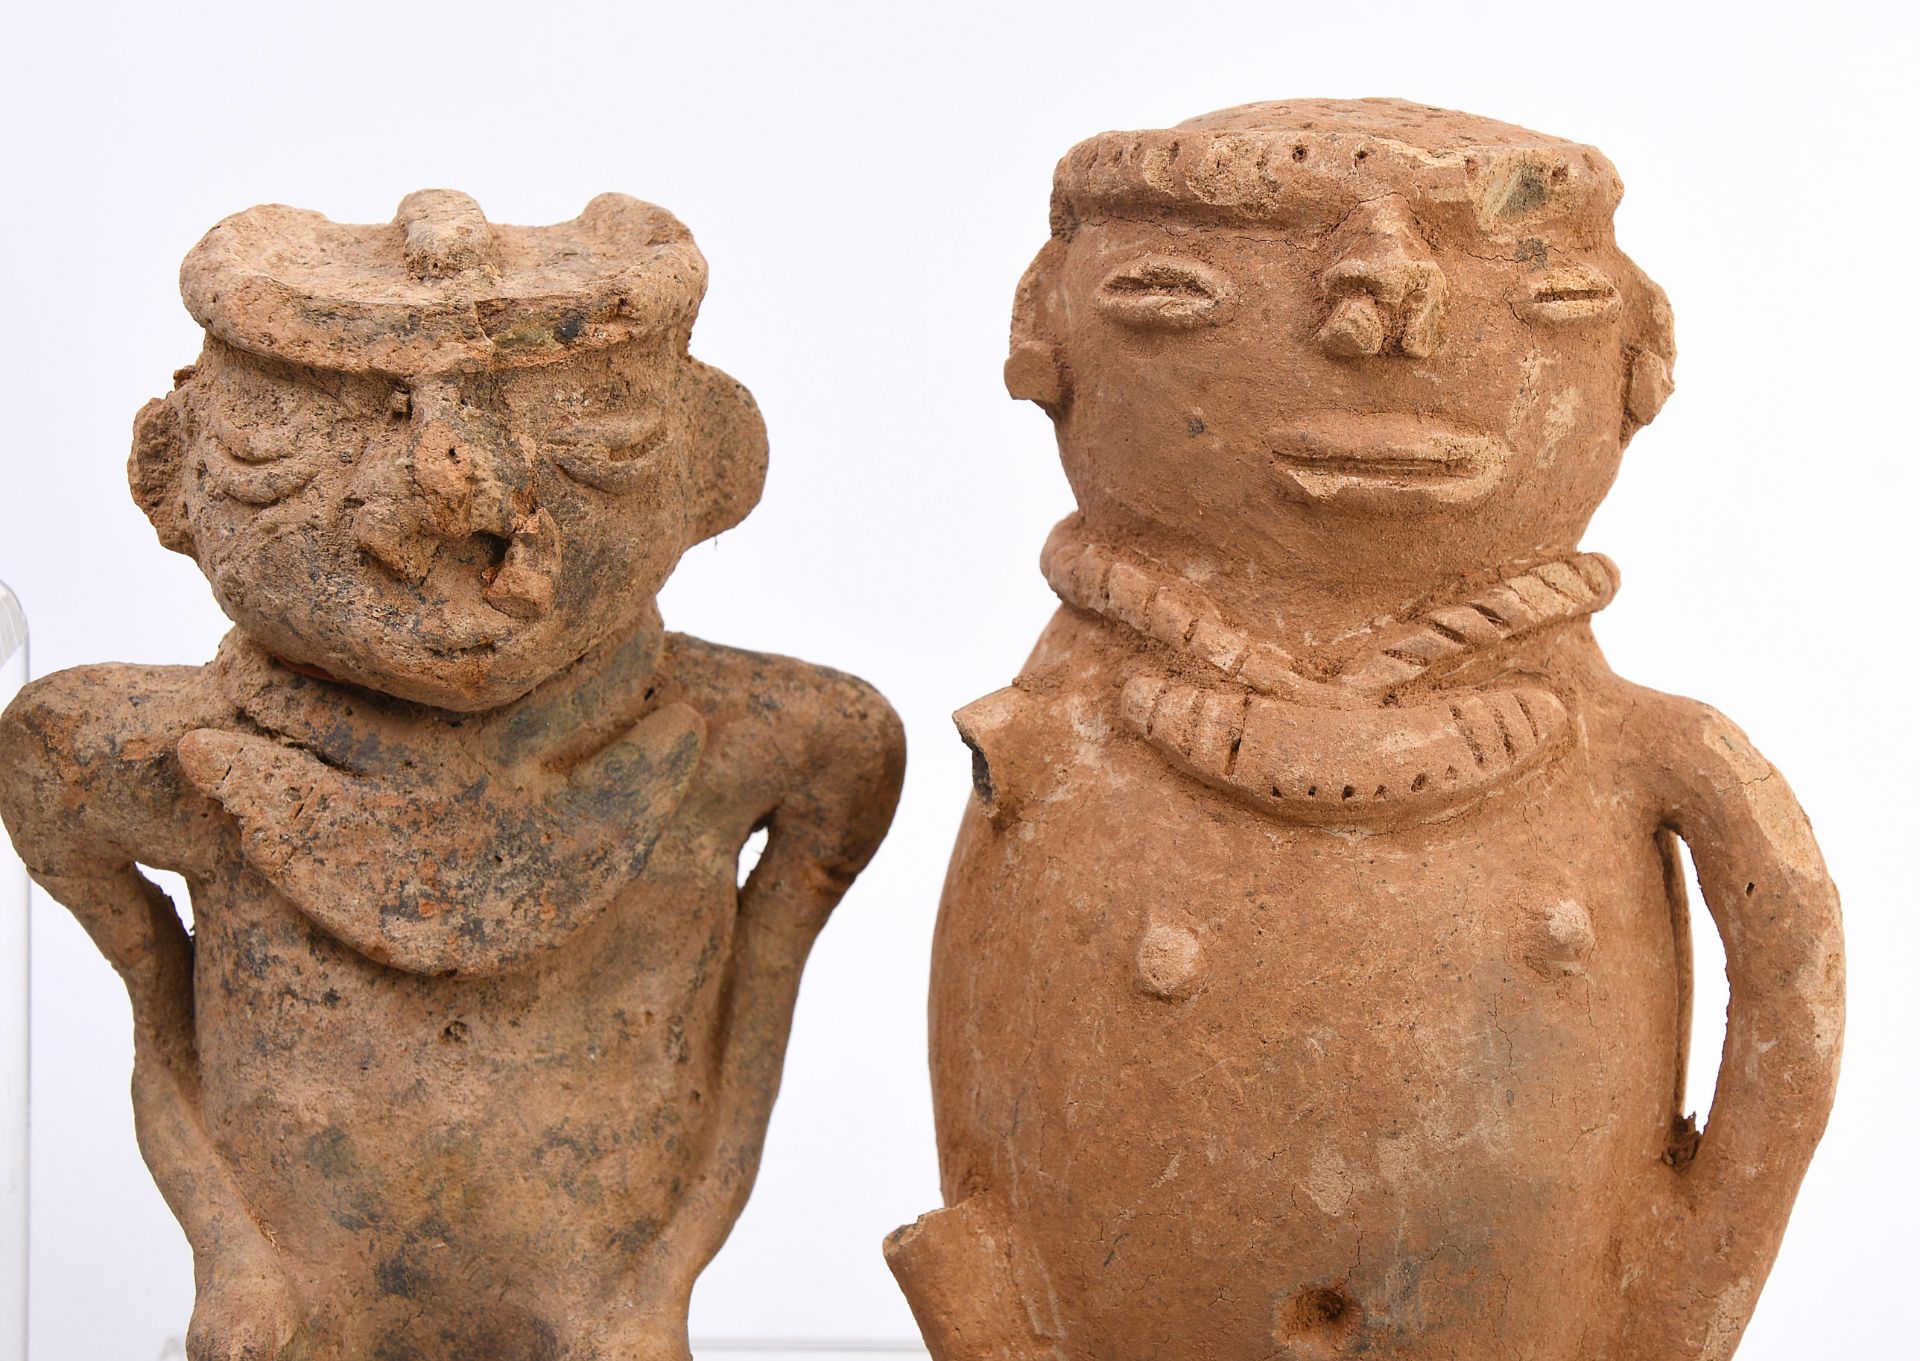 Colombia, Sinu region, a collection of fourteen various terracotta figures, ca. 1200-1400 AD. - Image 8 of 9